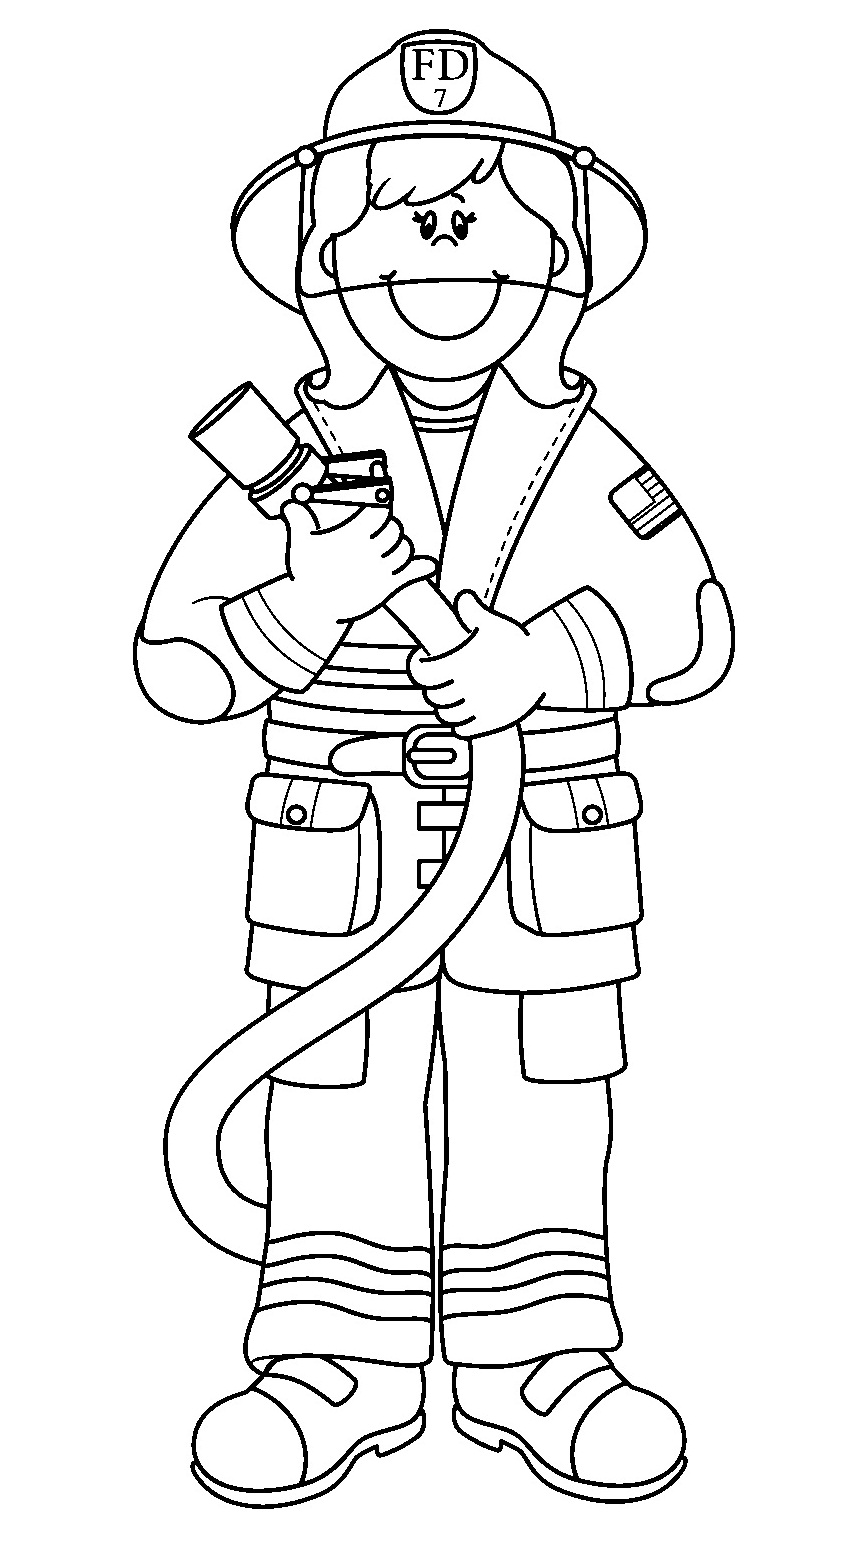 Firefighter coloring pages to download and print for free